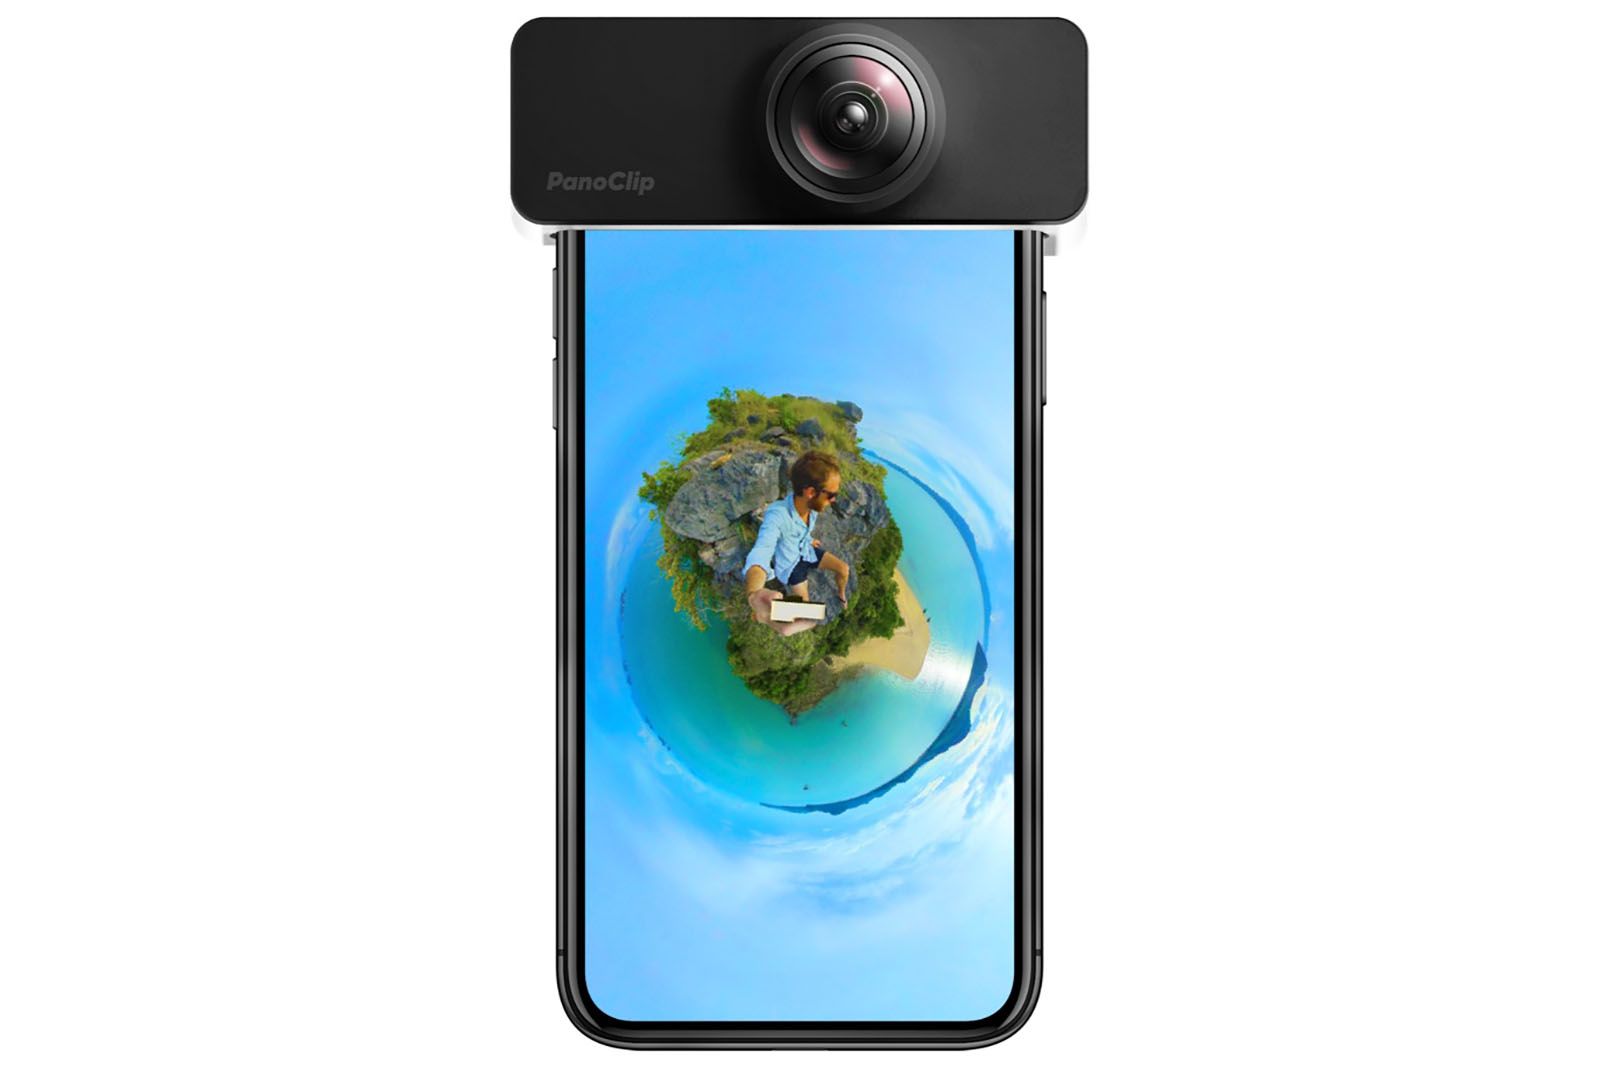 PanoClip camera for iPhone lets you shoot 360-degree and tiny planet photos for just 4999 image 1